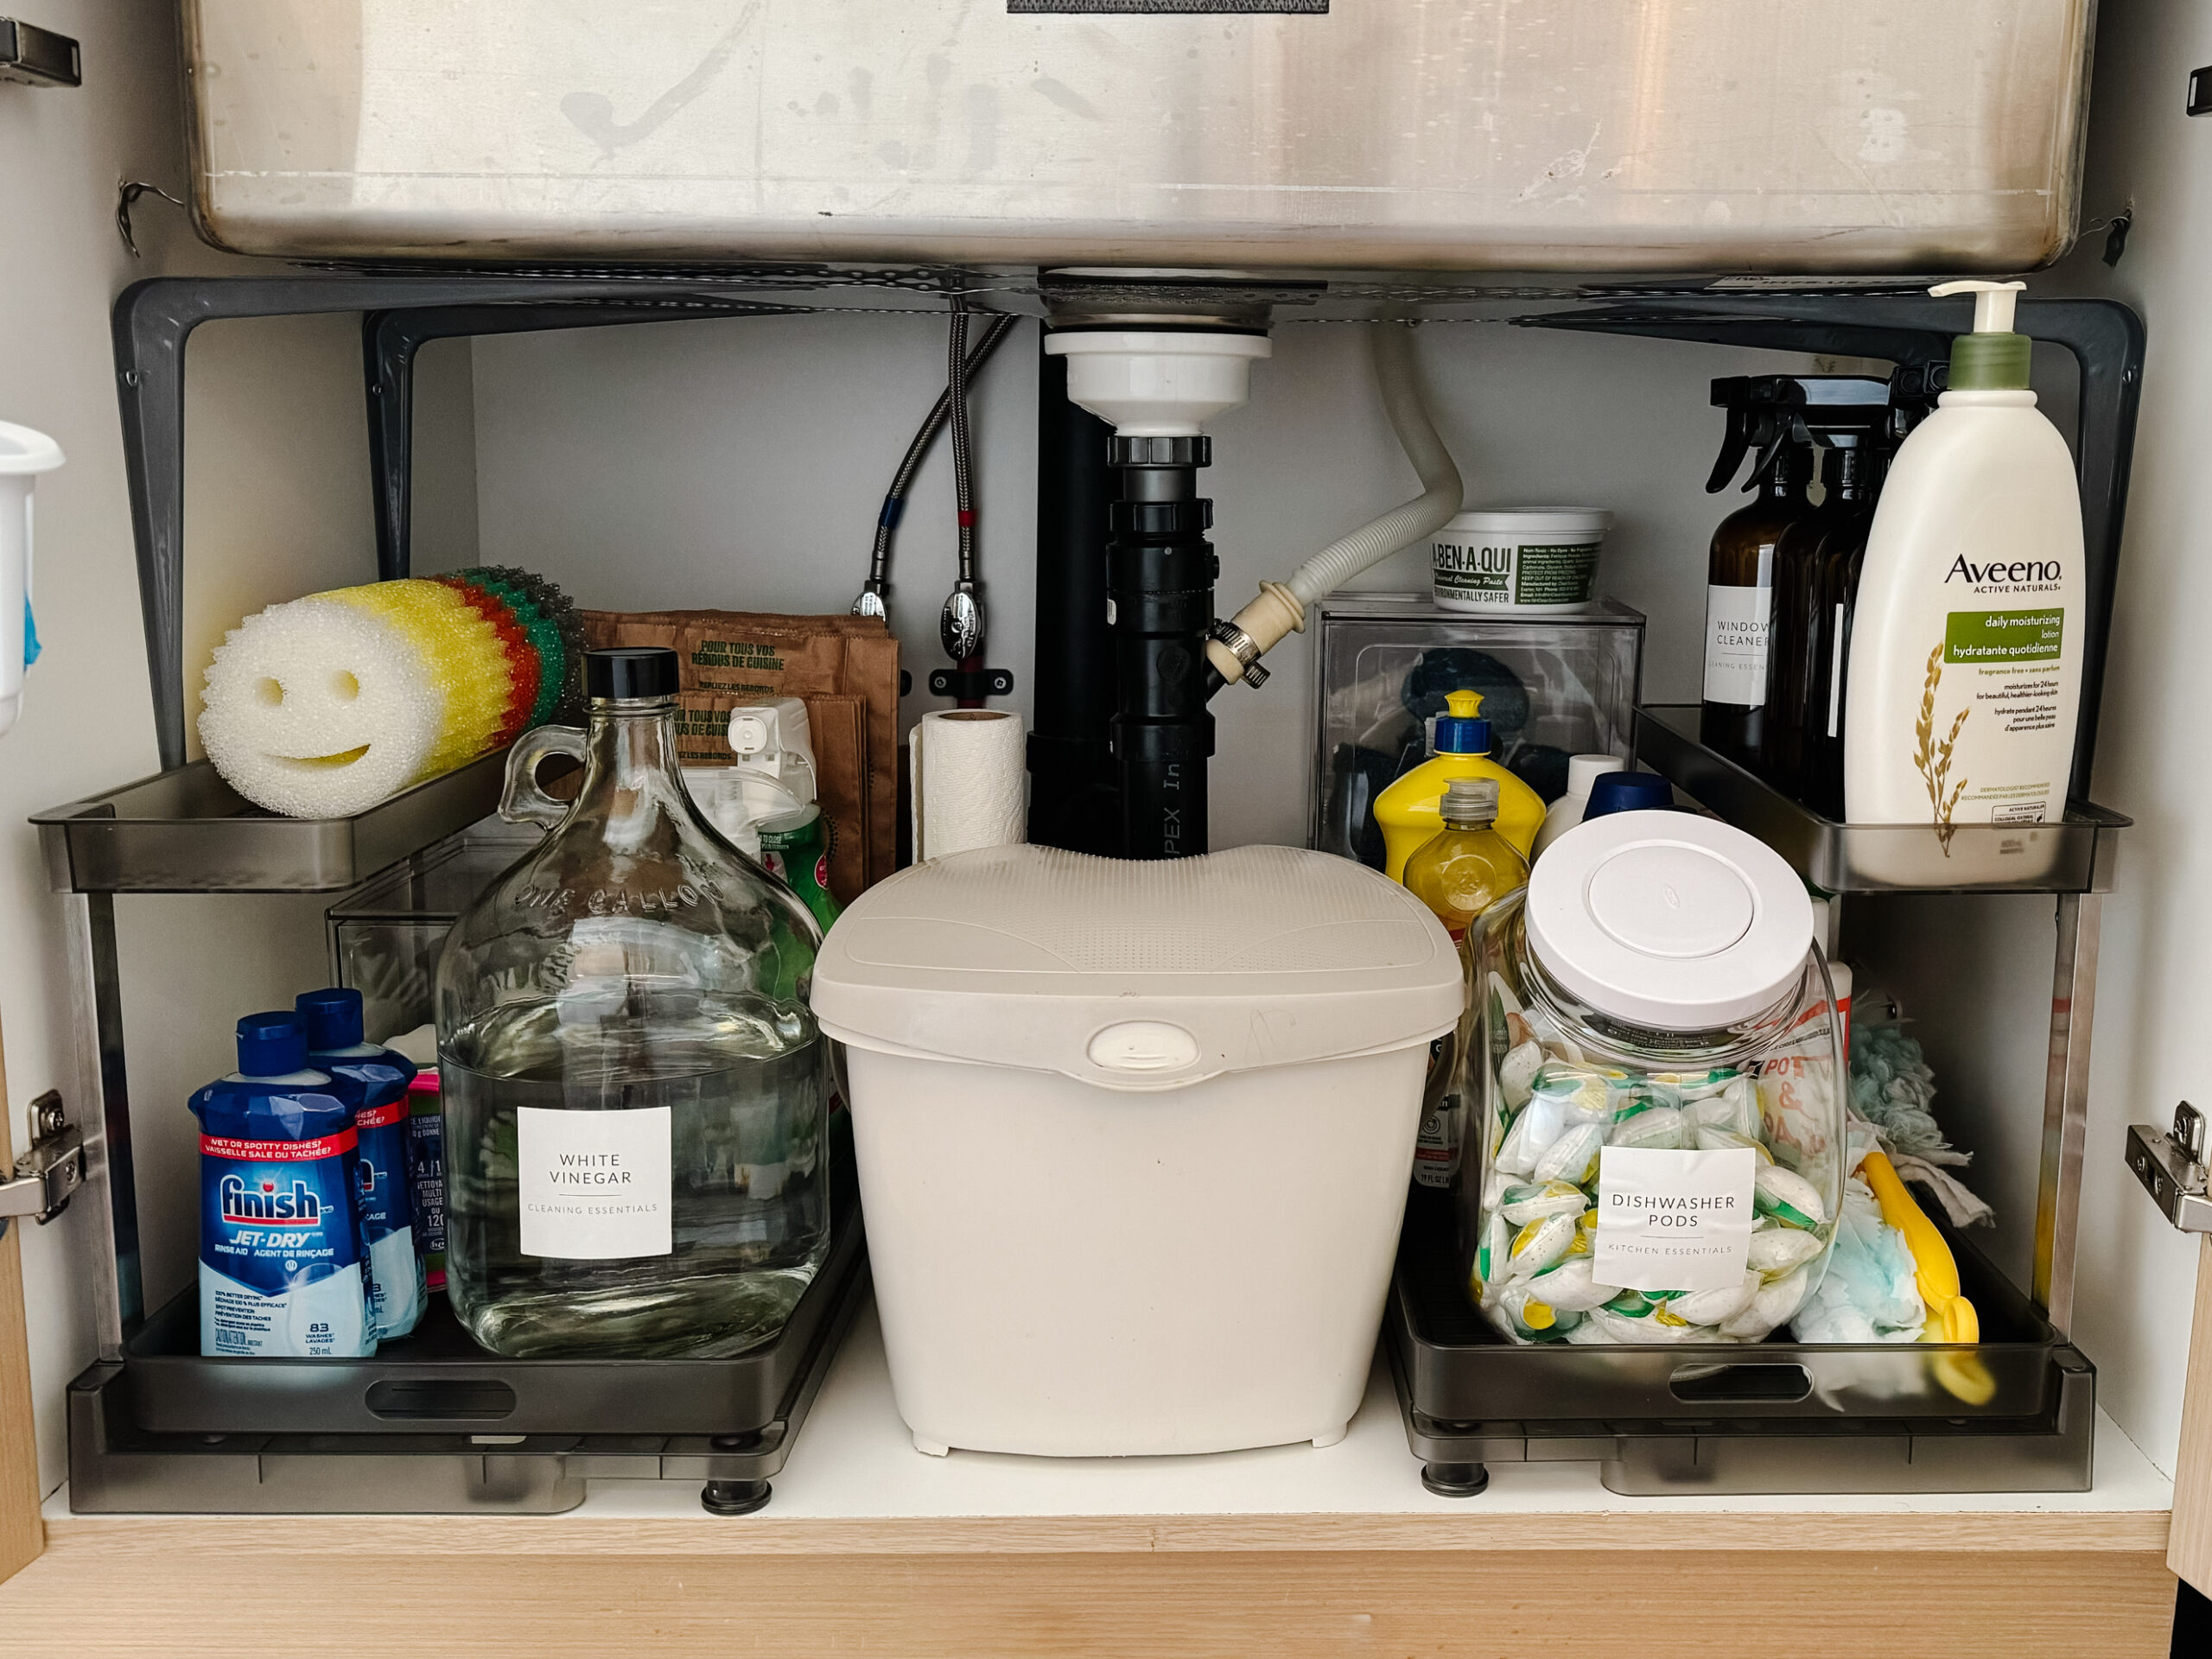 under the kitchen sink organization with a pull out drawer, glass container for vinegar, scrub daddys and more cleaning supplies